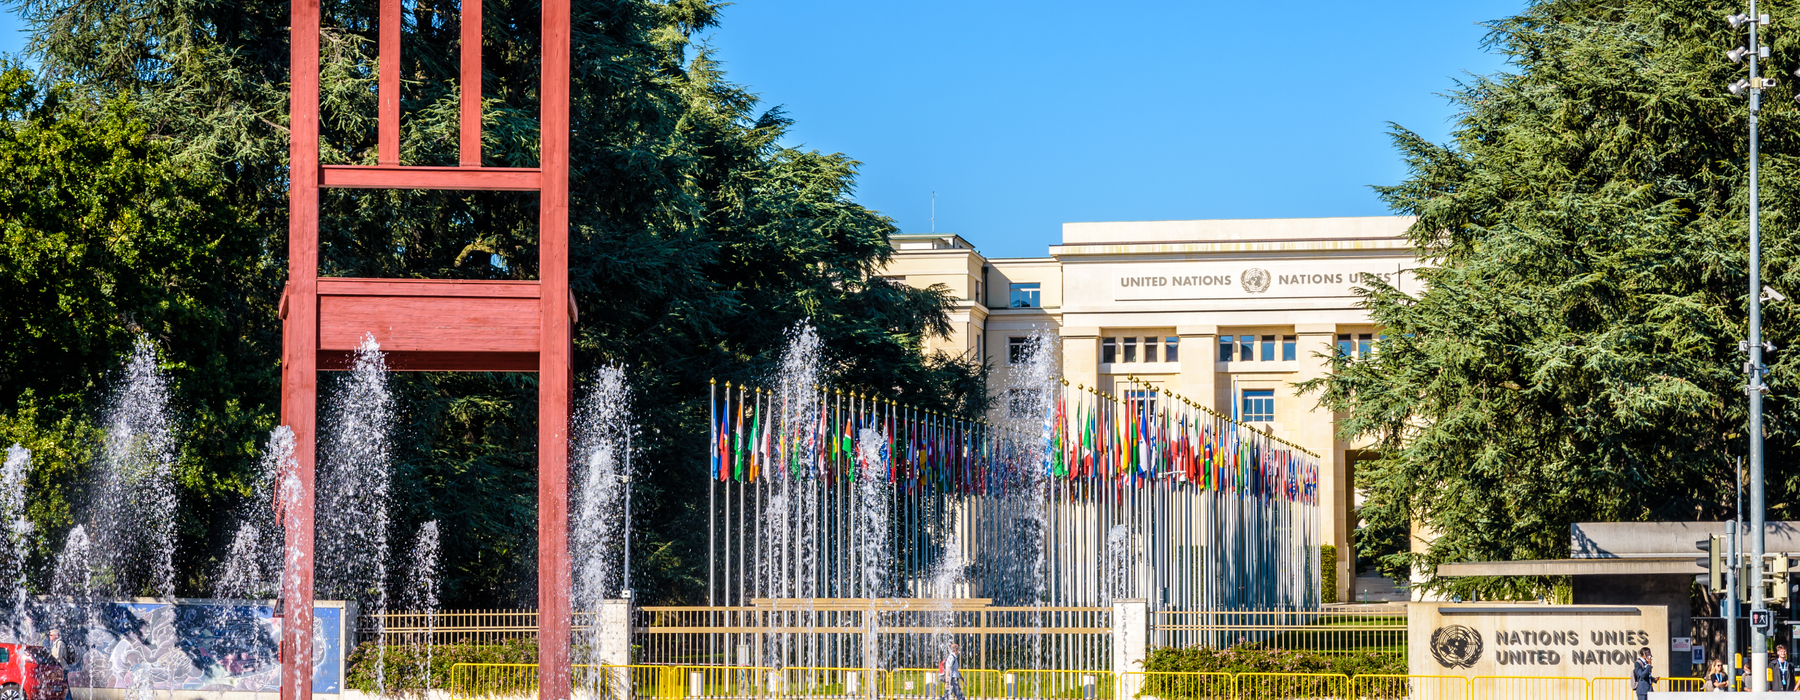 The UN building in Switzerland with an avenue of flags and water fountains in front